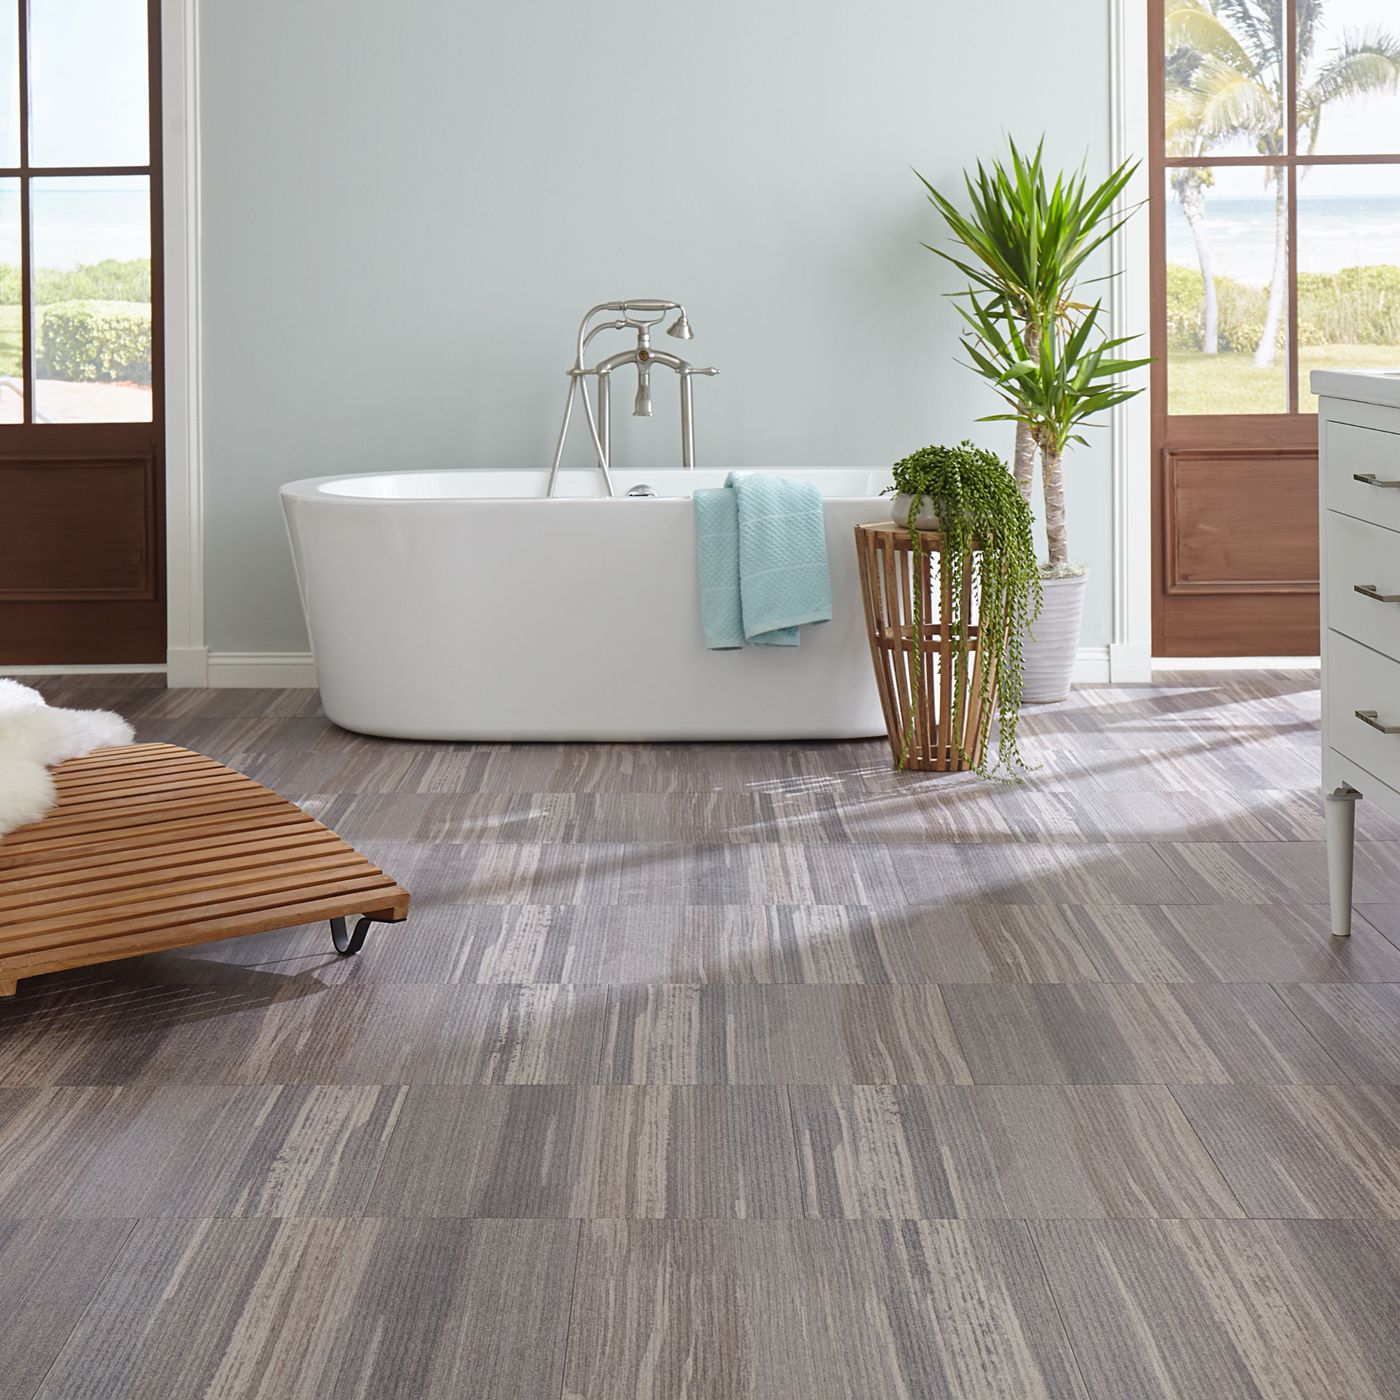 Best Vinyl Flooring For Bathrooms This Old House